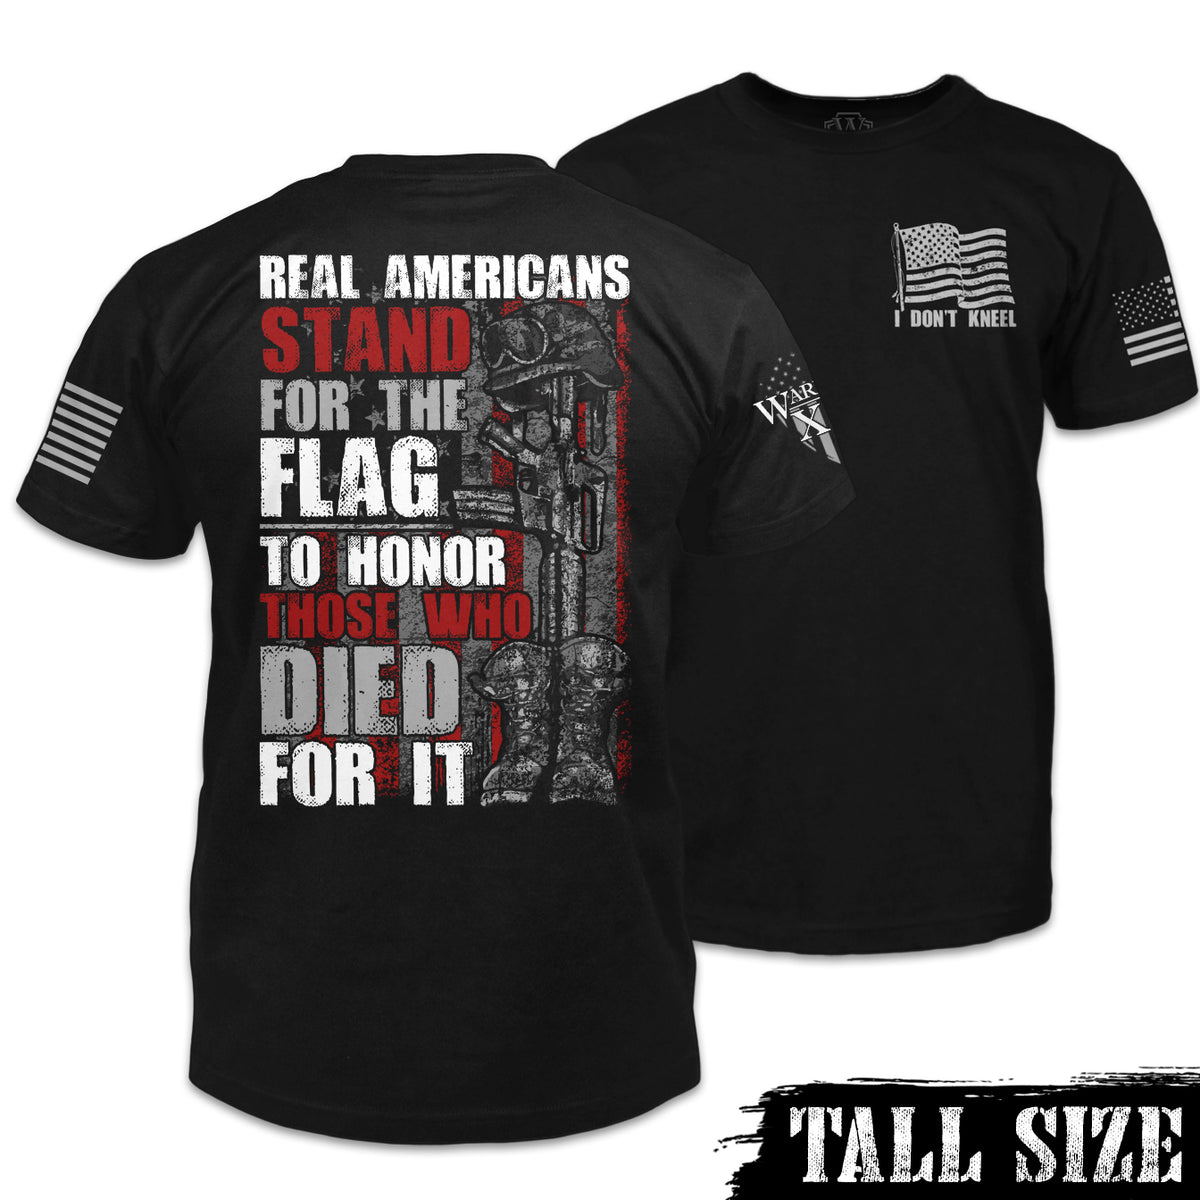 Front and back black tall size shirt with the words "Real Americans Stand For The Flag To Honor Those Who Died For It!" printed on the shirt.